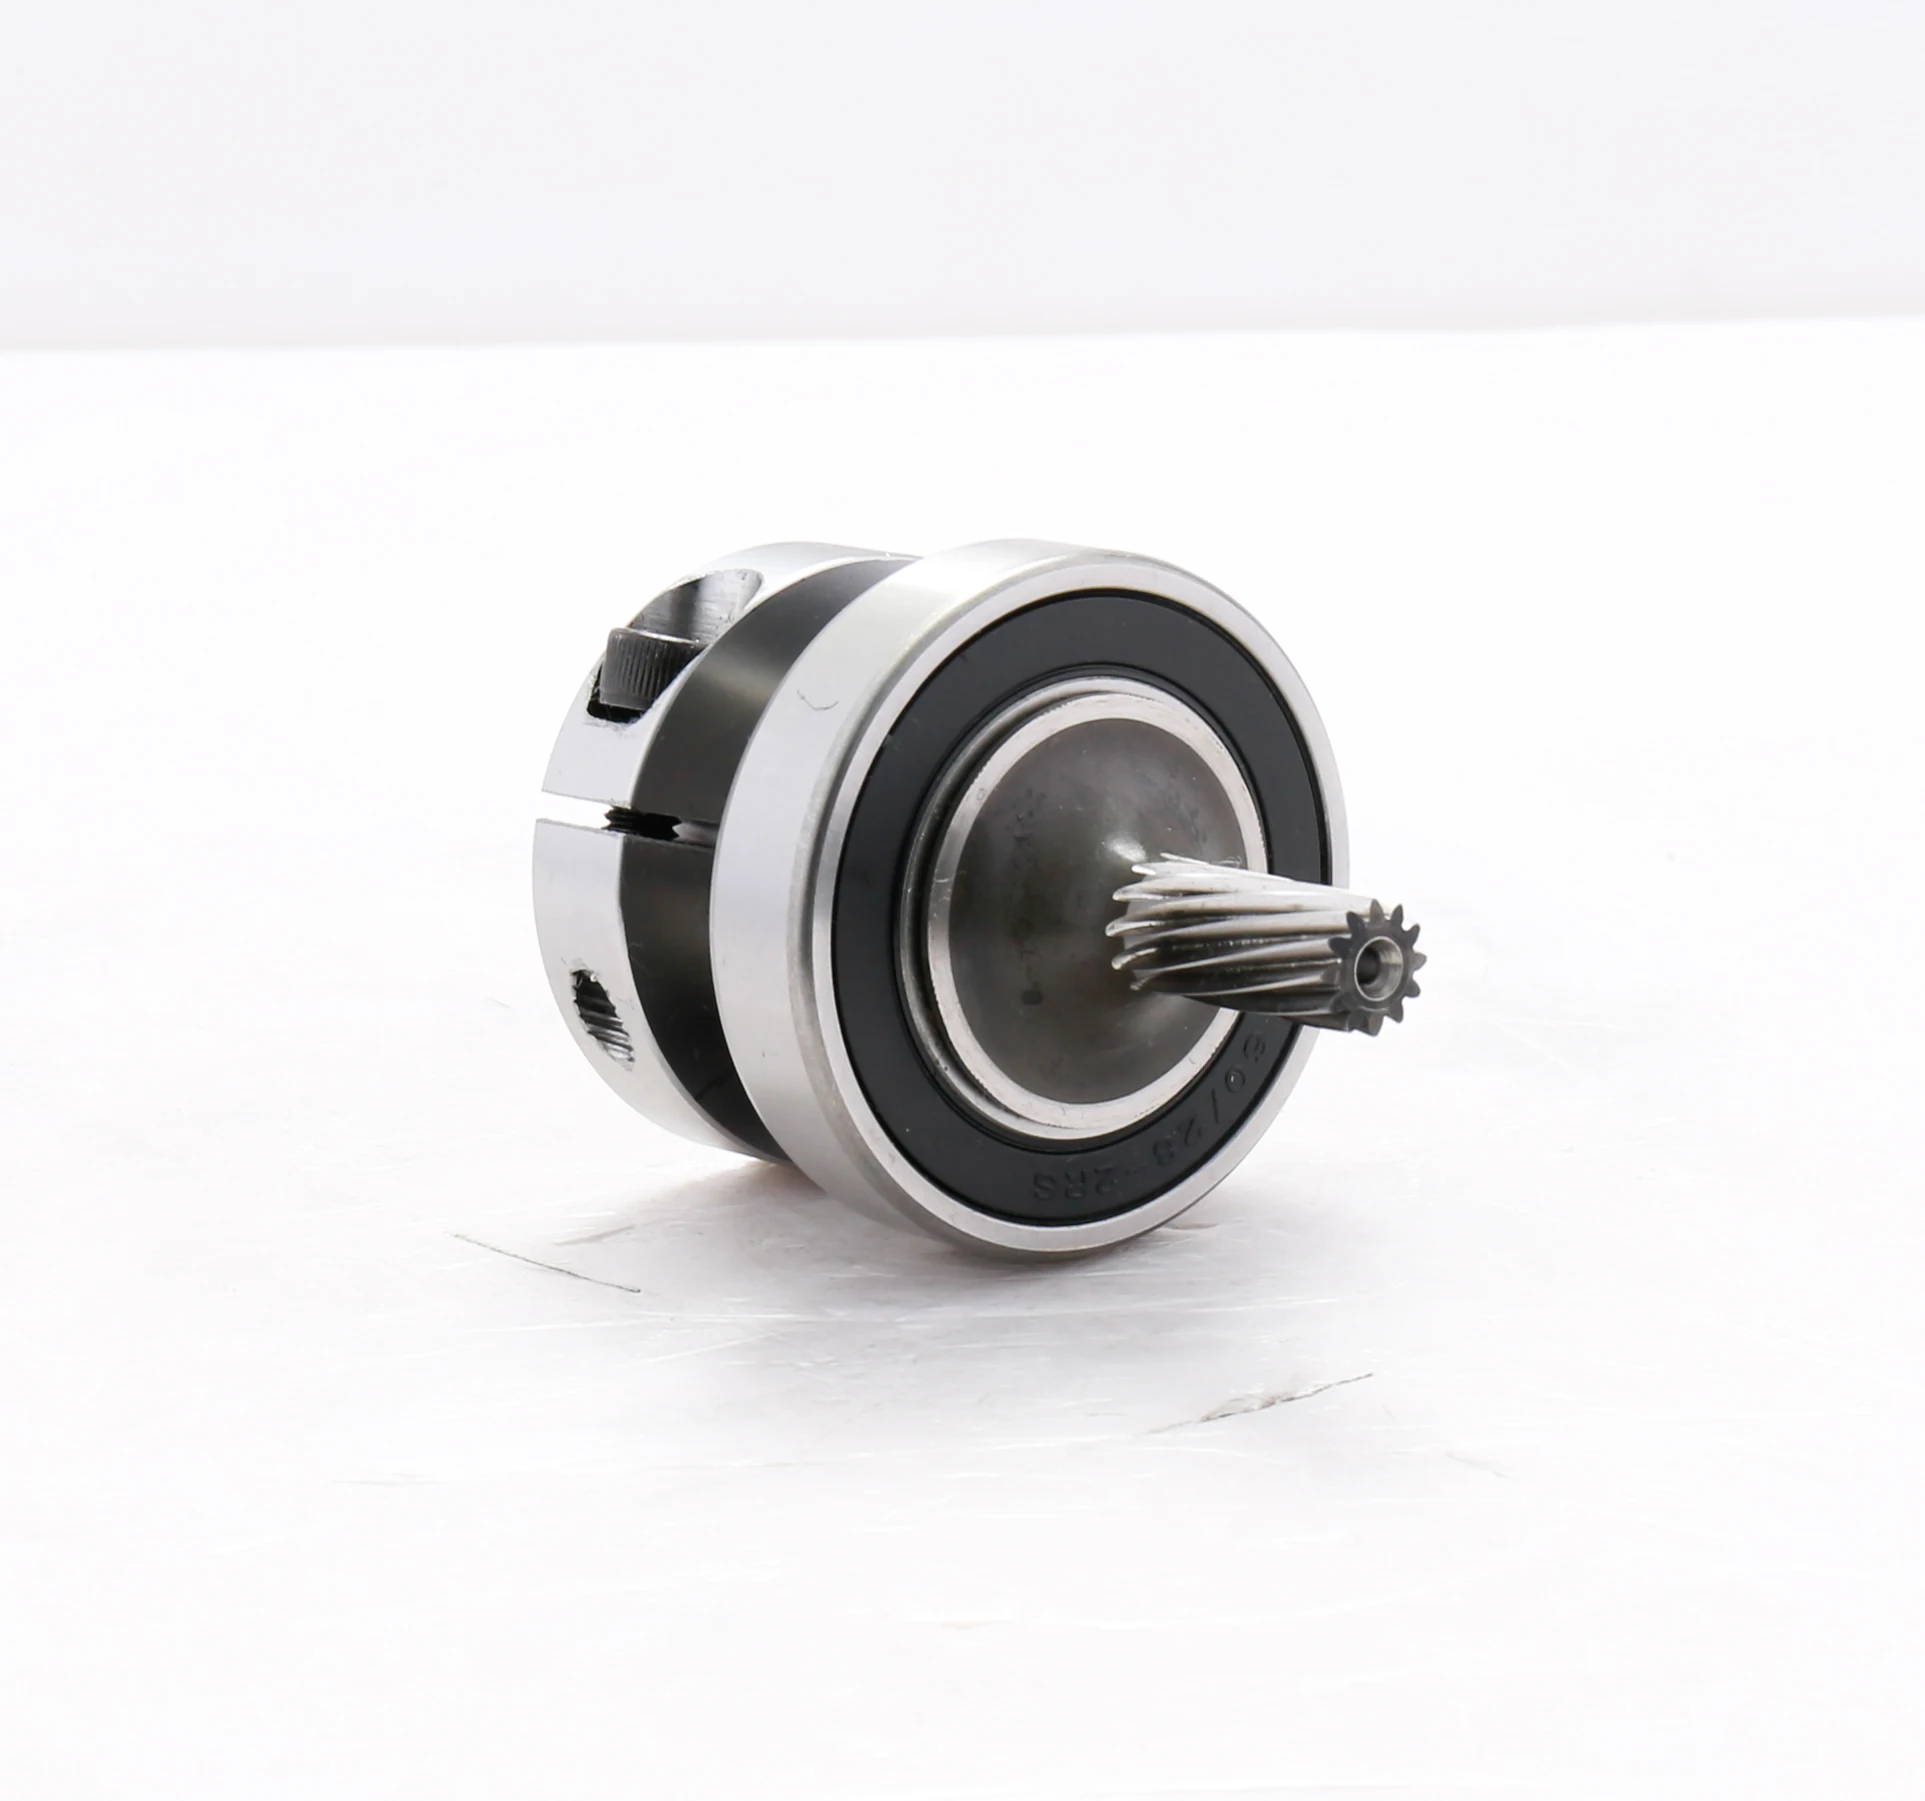 ZDWE Series 60mm Round Flange Right Angle Planetary Gearbox Reducer , One Stage Reduction Ratio 3:1-10:1 For Servo Motor